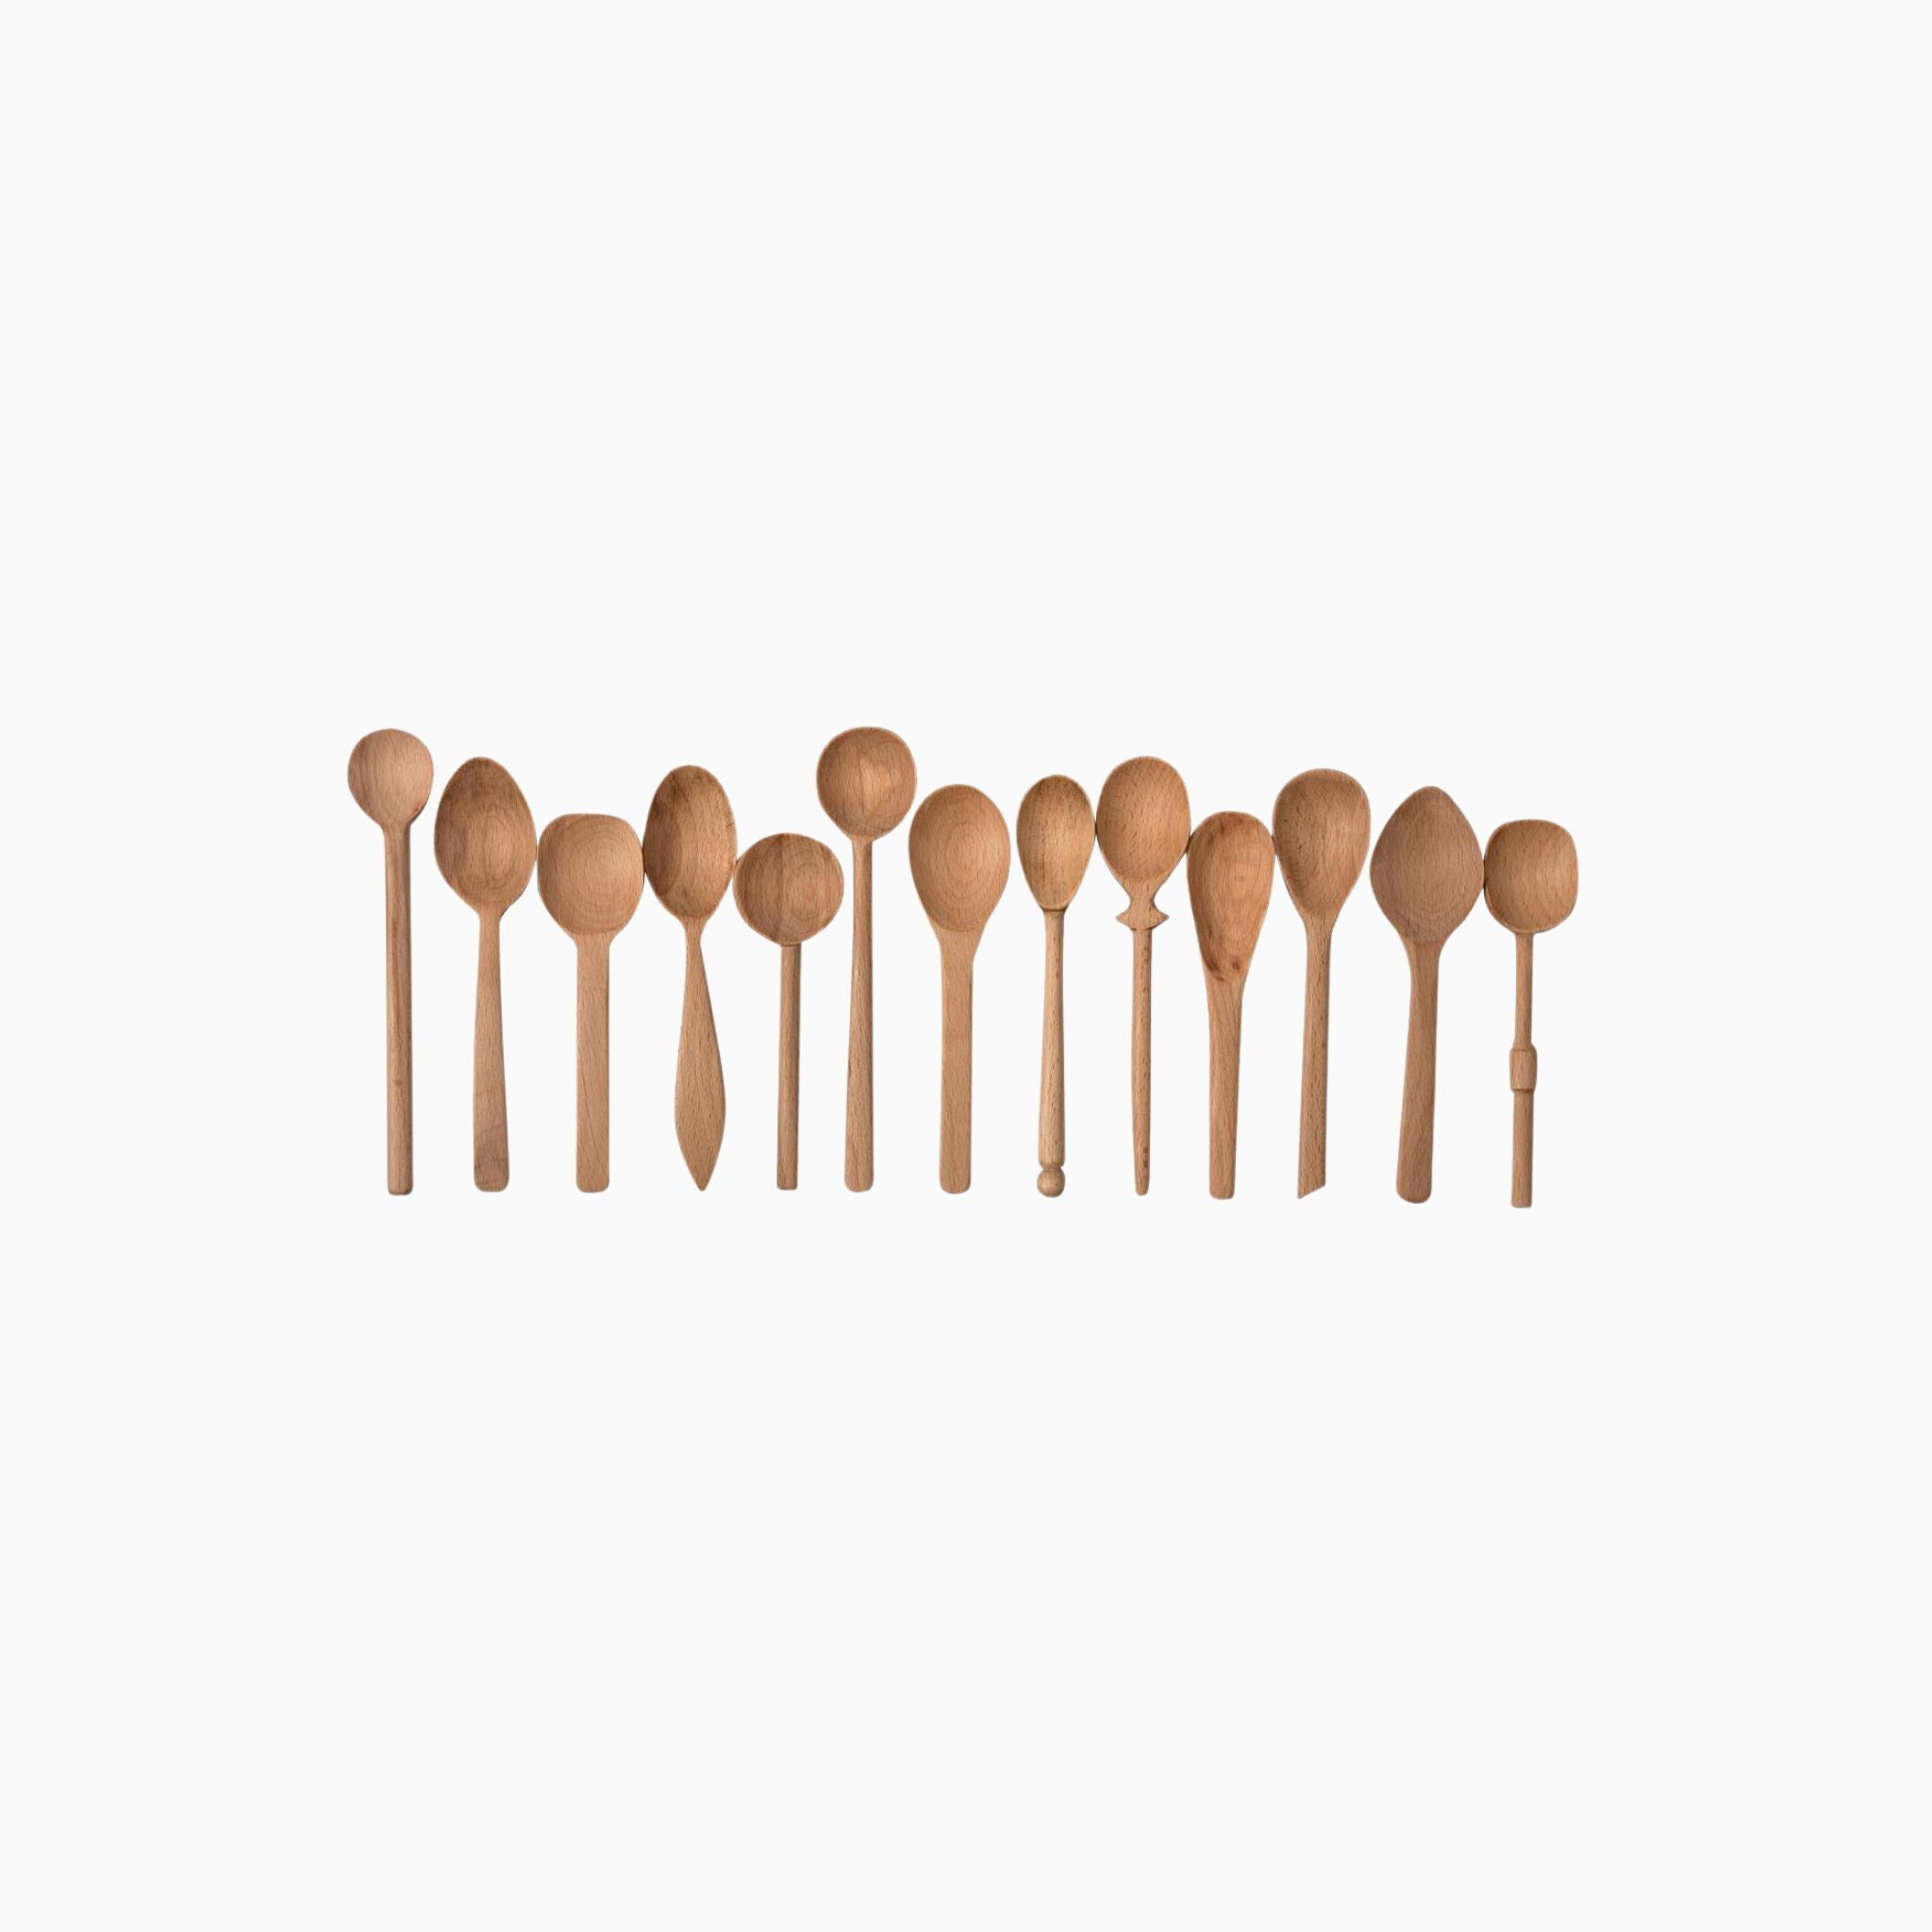 Simply Elevated - Our small wood spoons are an instant variety of thirteen assorted styles with no two alike, replicated from some of our favorites.